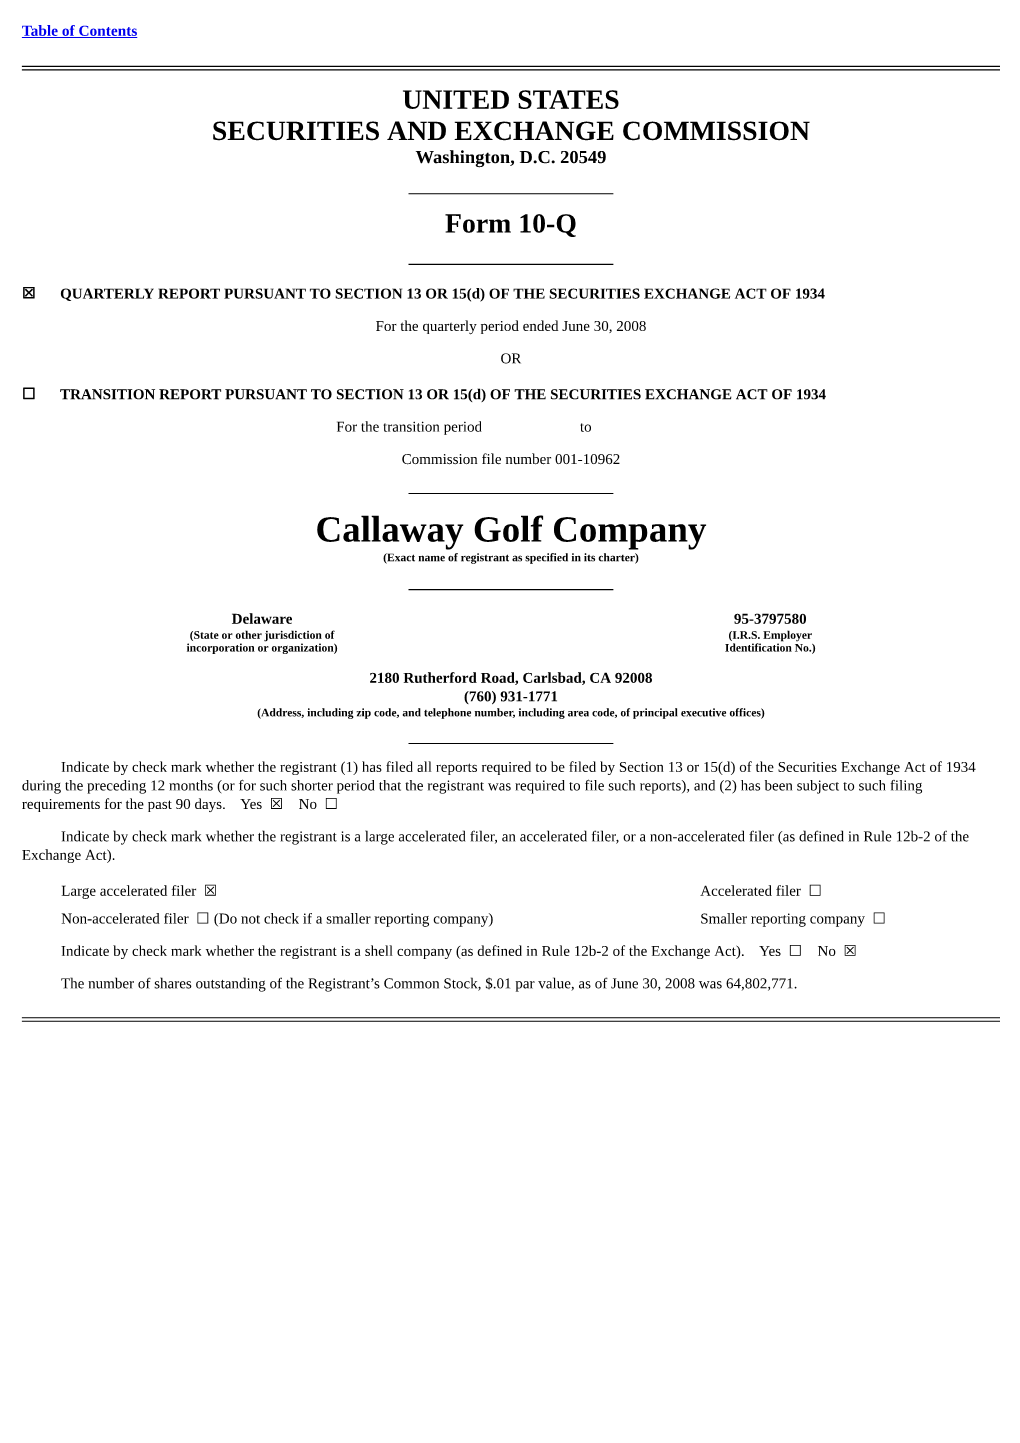 Callaway Golf Company (Exact Name of Registrant As Specified in Its Charter)